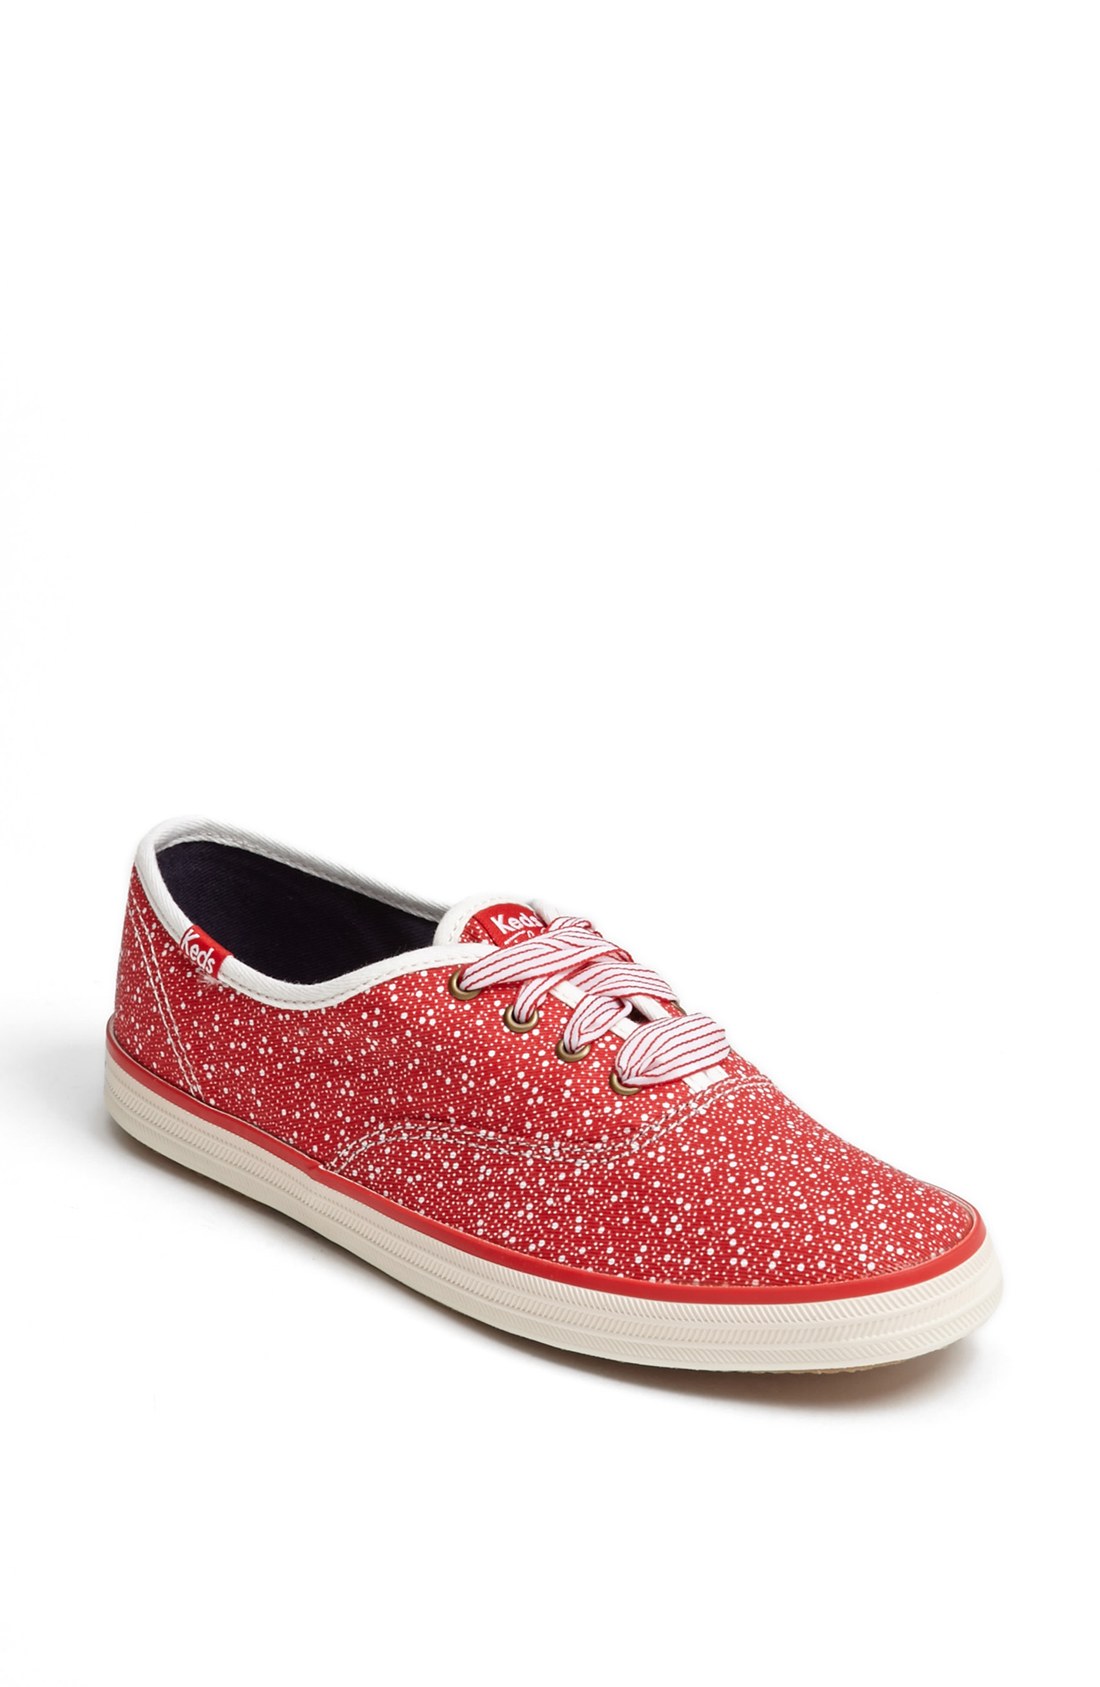 Keds Taylor Swift Seltzer Dot Champion Sneaker in Red | Lyst